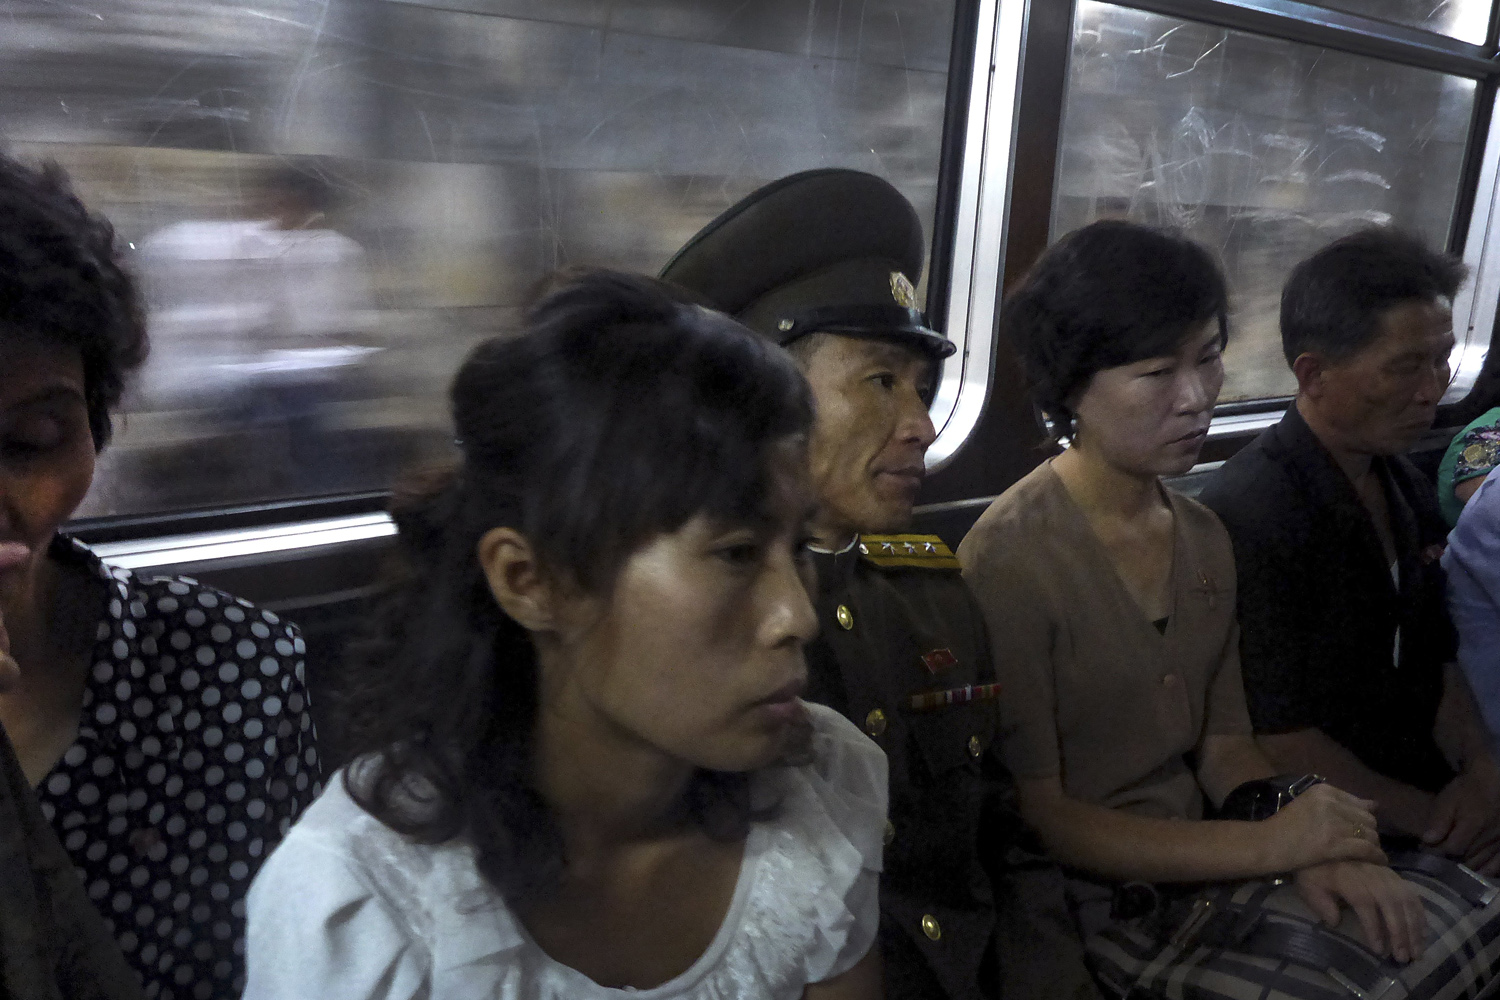 Commuters ride on a subway in Pyongyang, Sept. 1, 2014. Foreign visitors are usually only allowed to take one to two stops, on Pyongyang's north-south Chollima subway line.